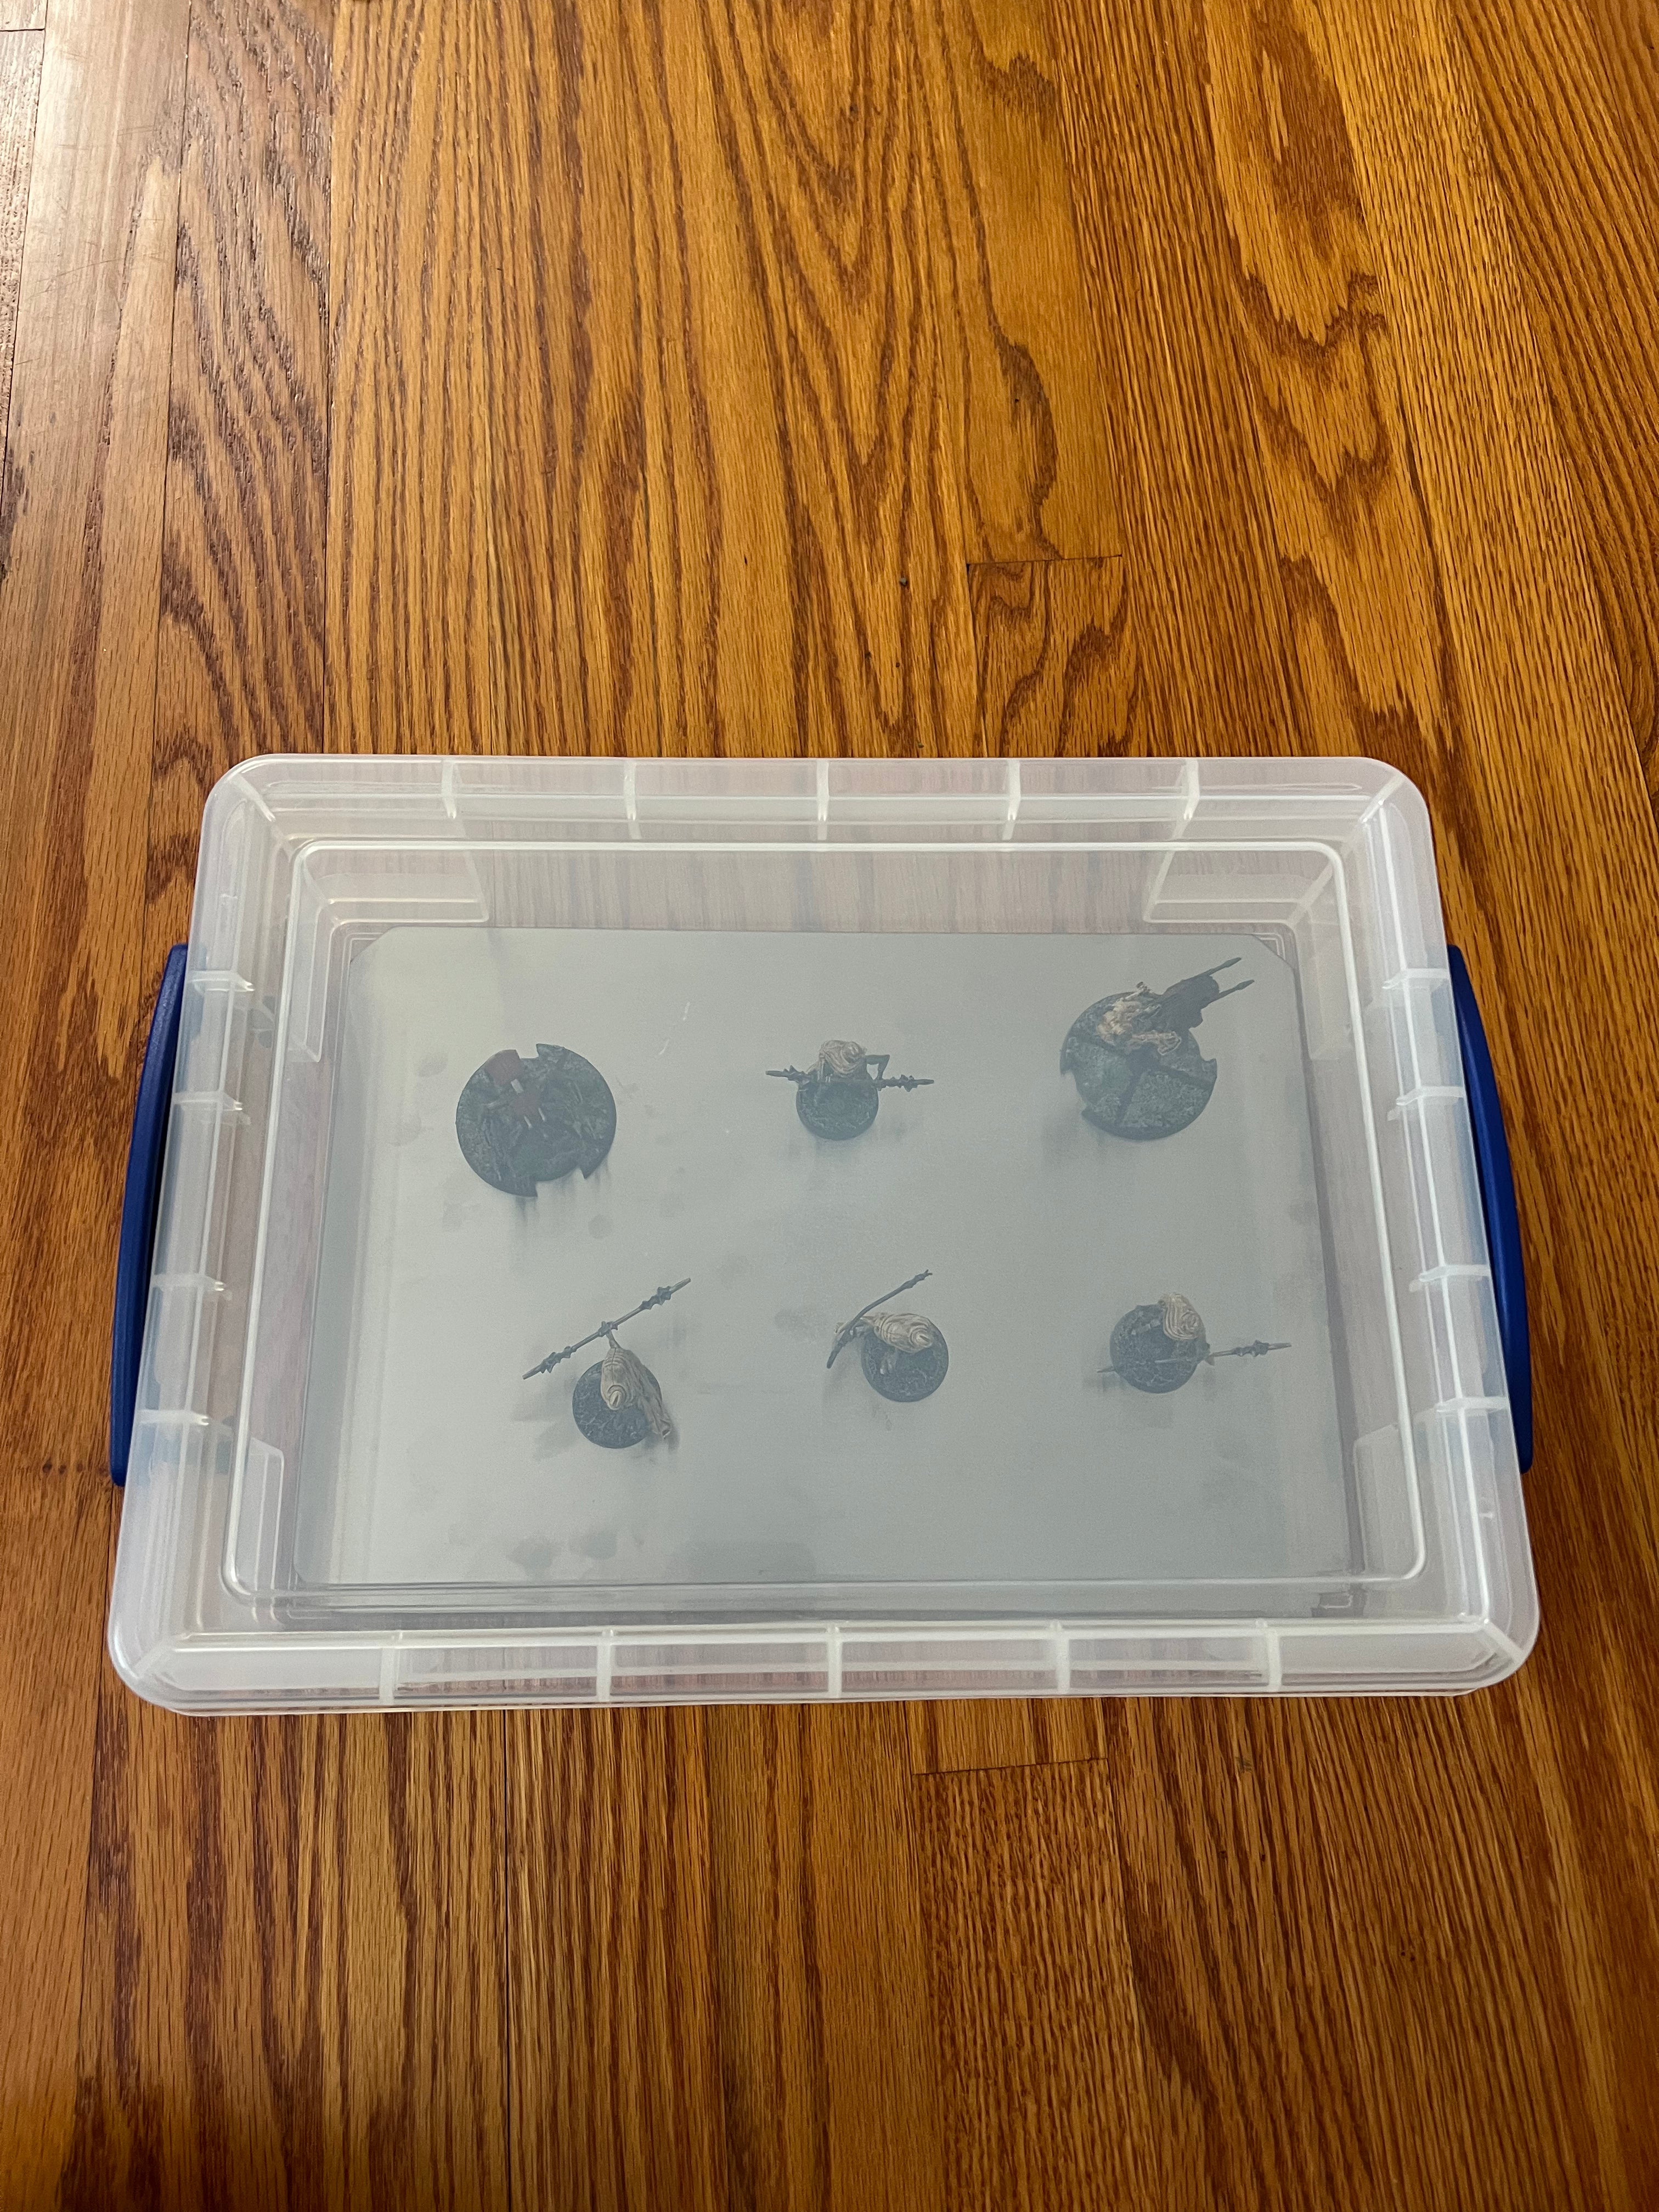 PSA: KR (KaiserRushforth) Multicase bags are the perfect fit for Really  Useful Boxes for those who use the magnetised bases and magnetic  sheet-glued-to-box method for miniature storage (more details in comment  section). 